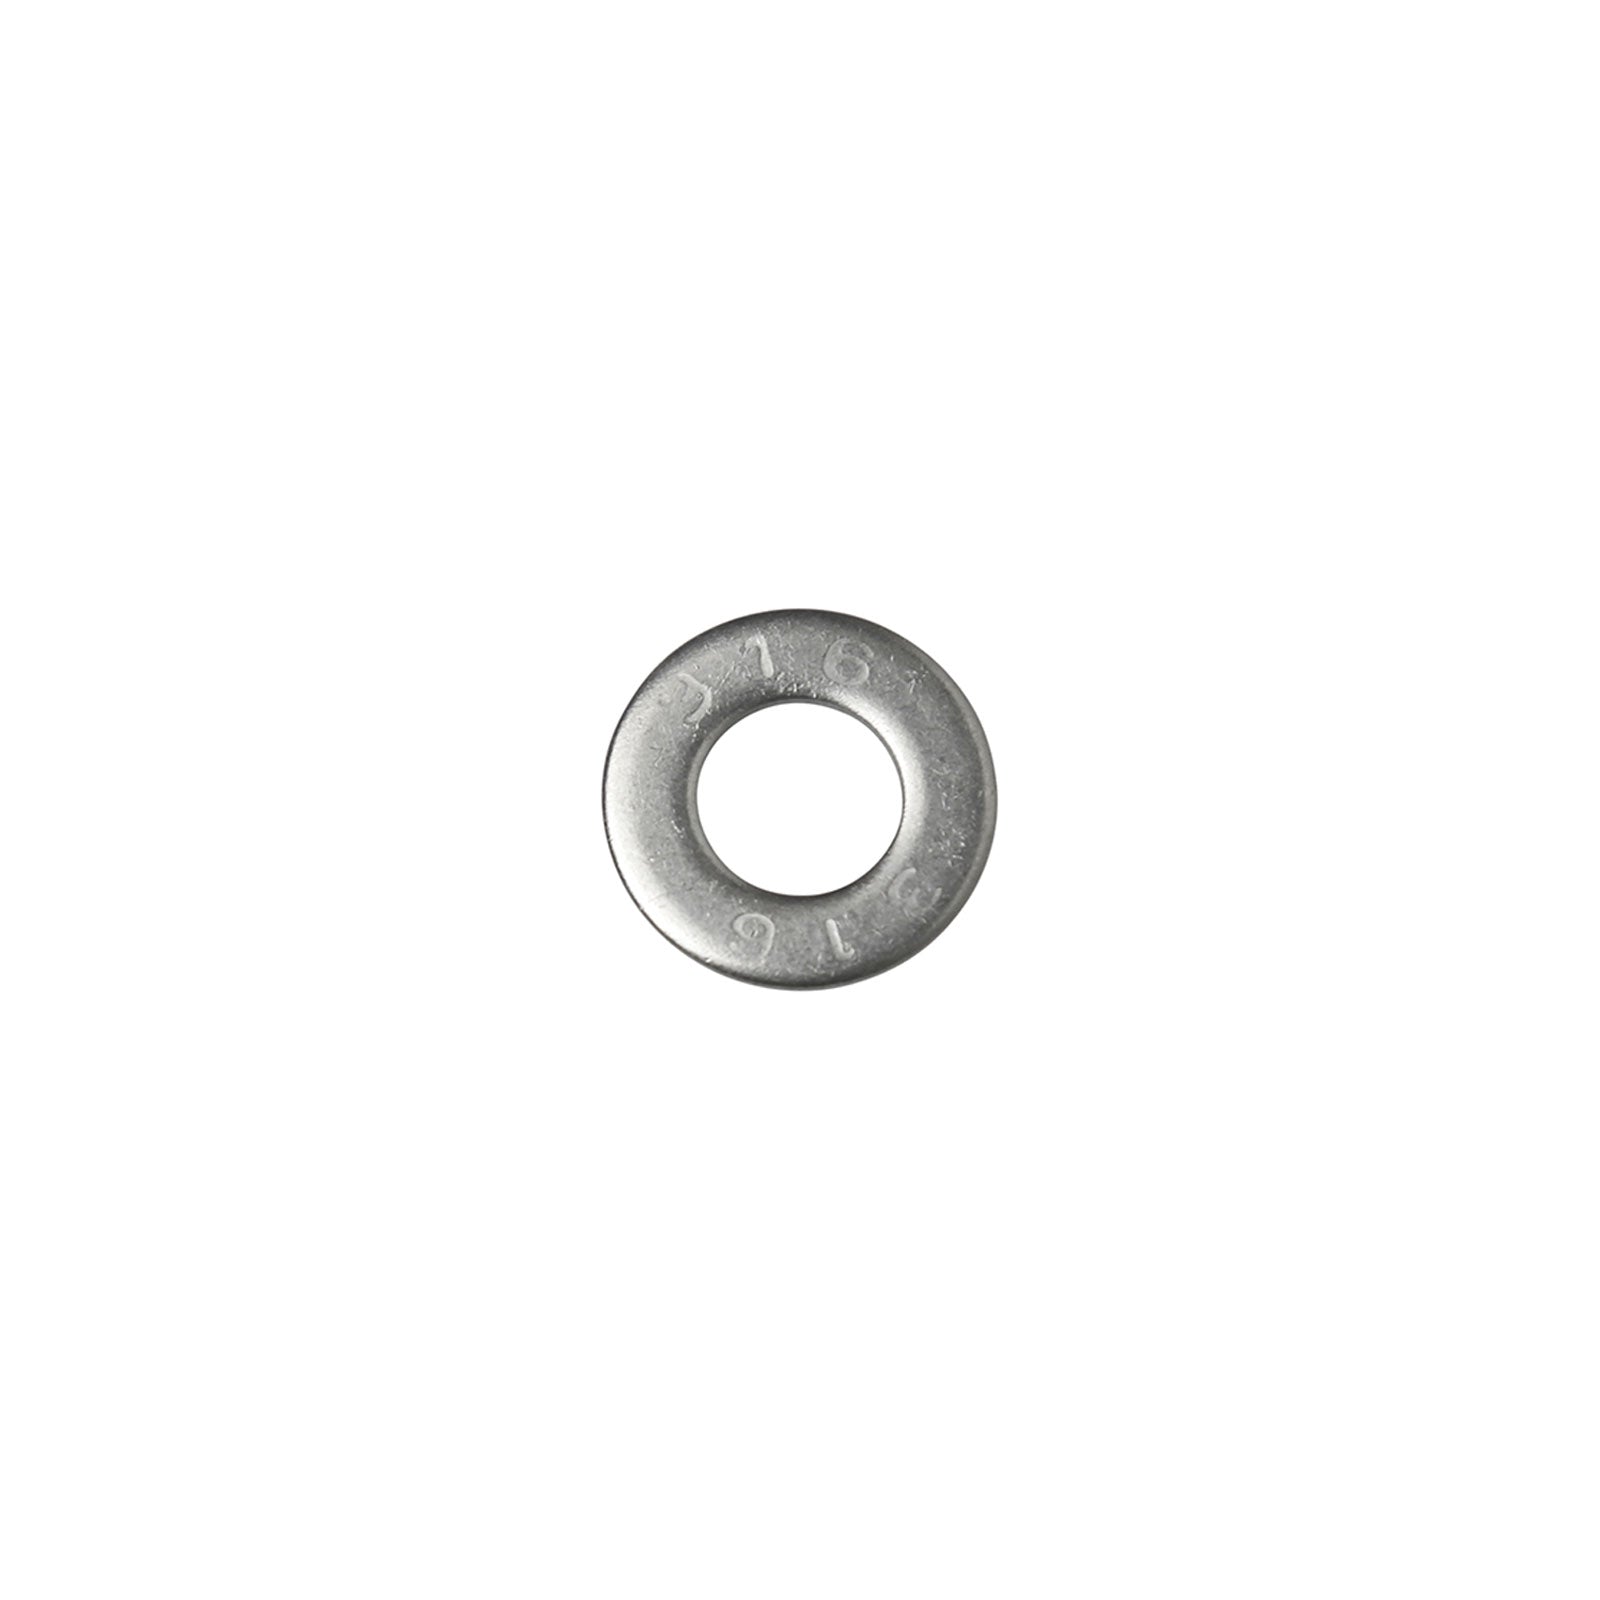 5/16" Conquest SAE Flat Washer - 316 Stainless Steel